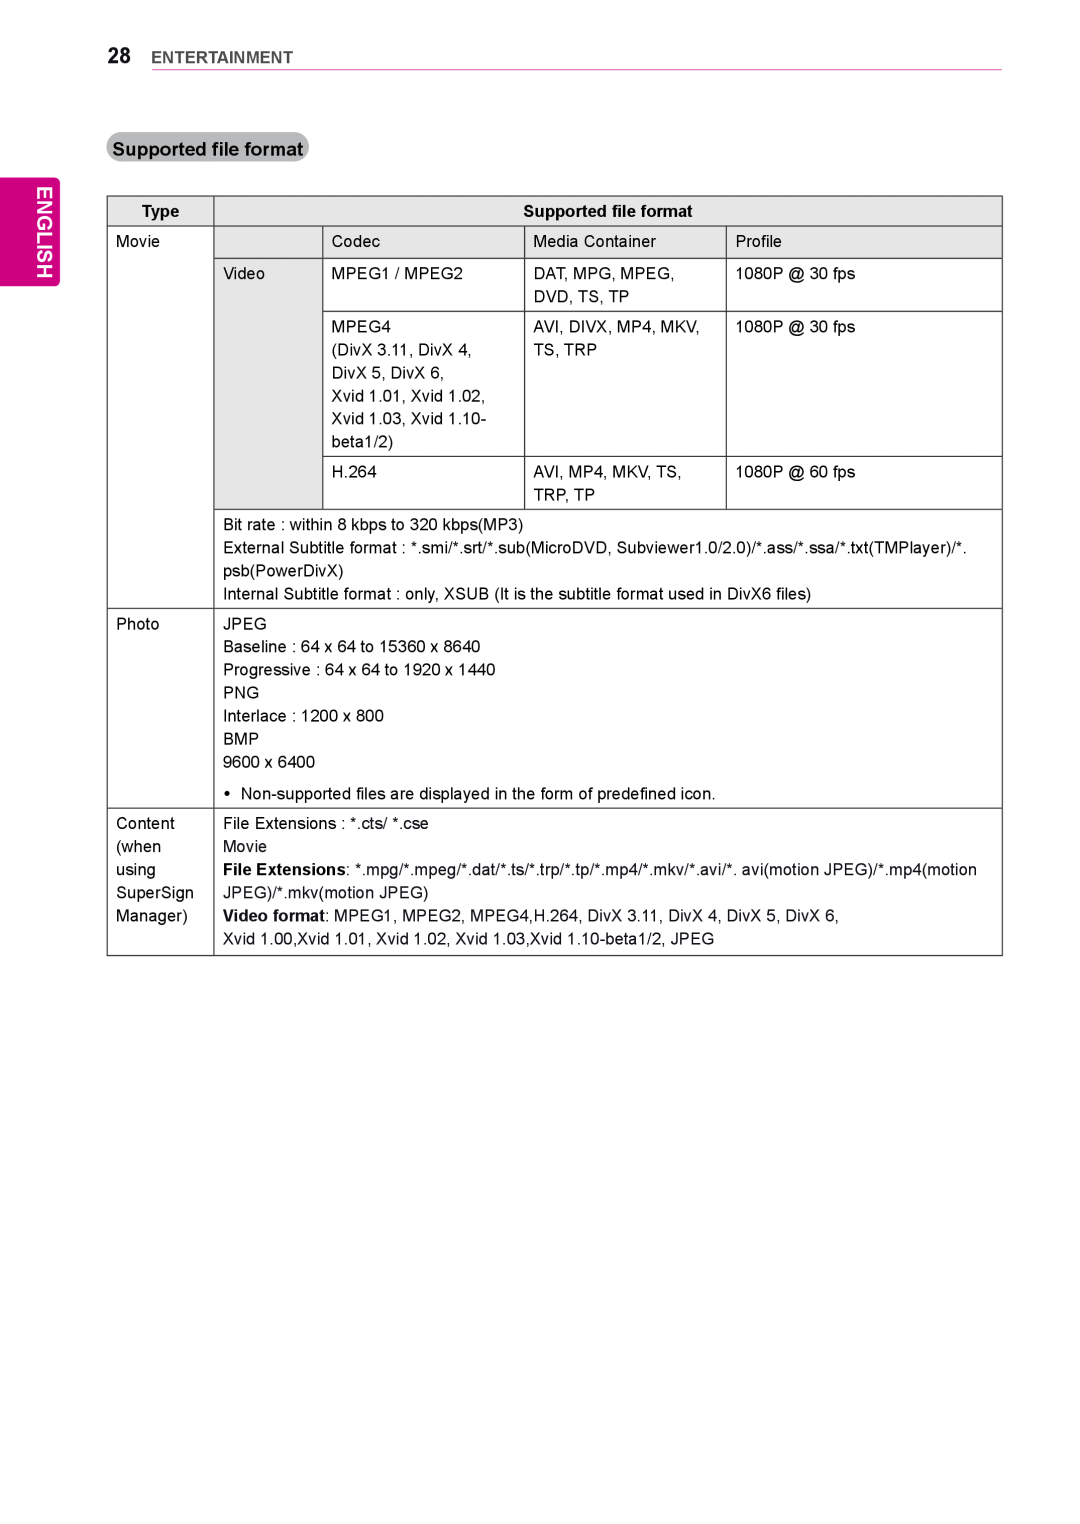 LG Electronics 47LV35A, 55LV35A owner manual English, Supported file format, Entertainment, Type 